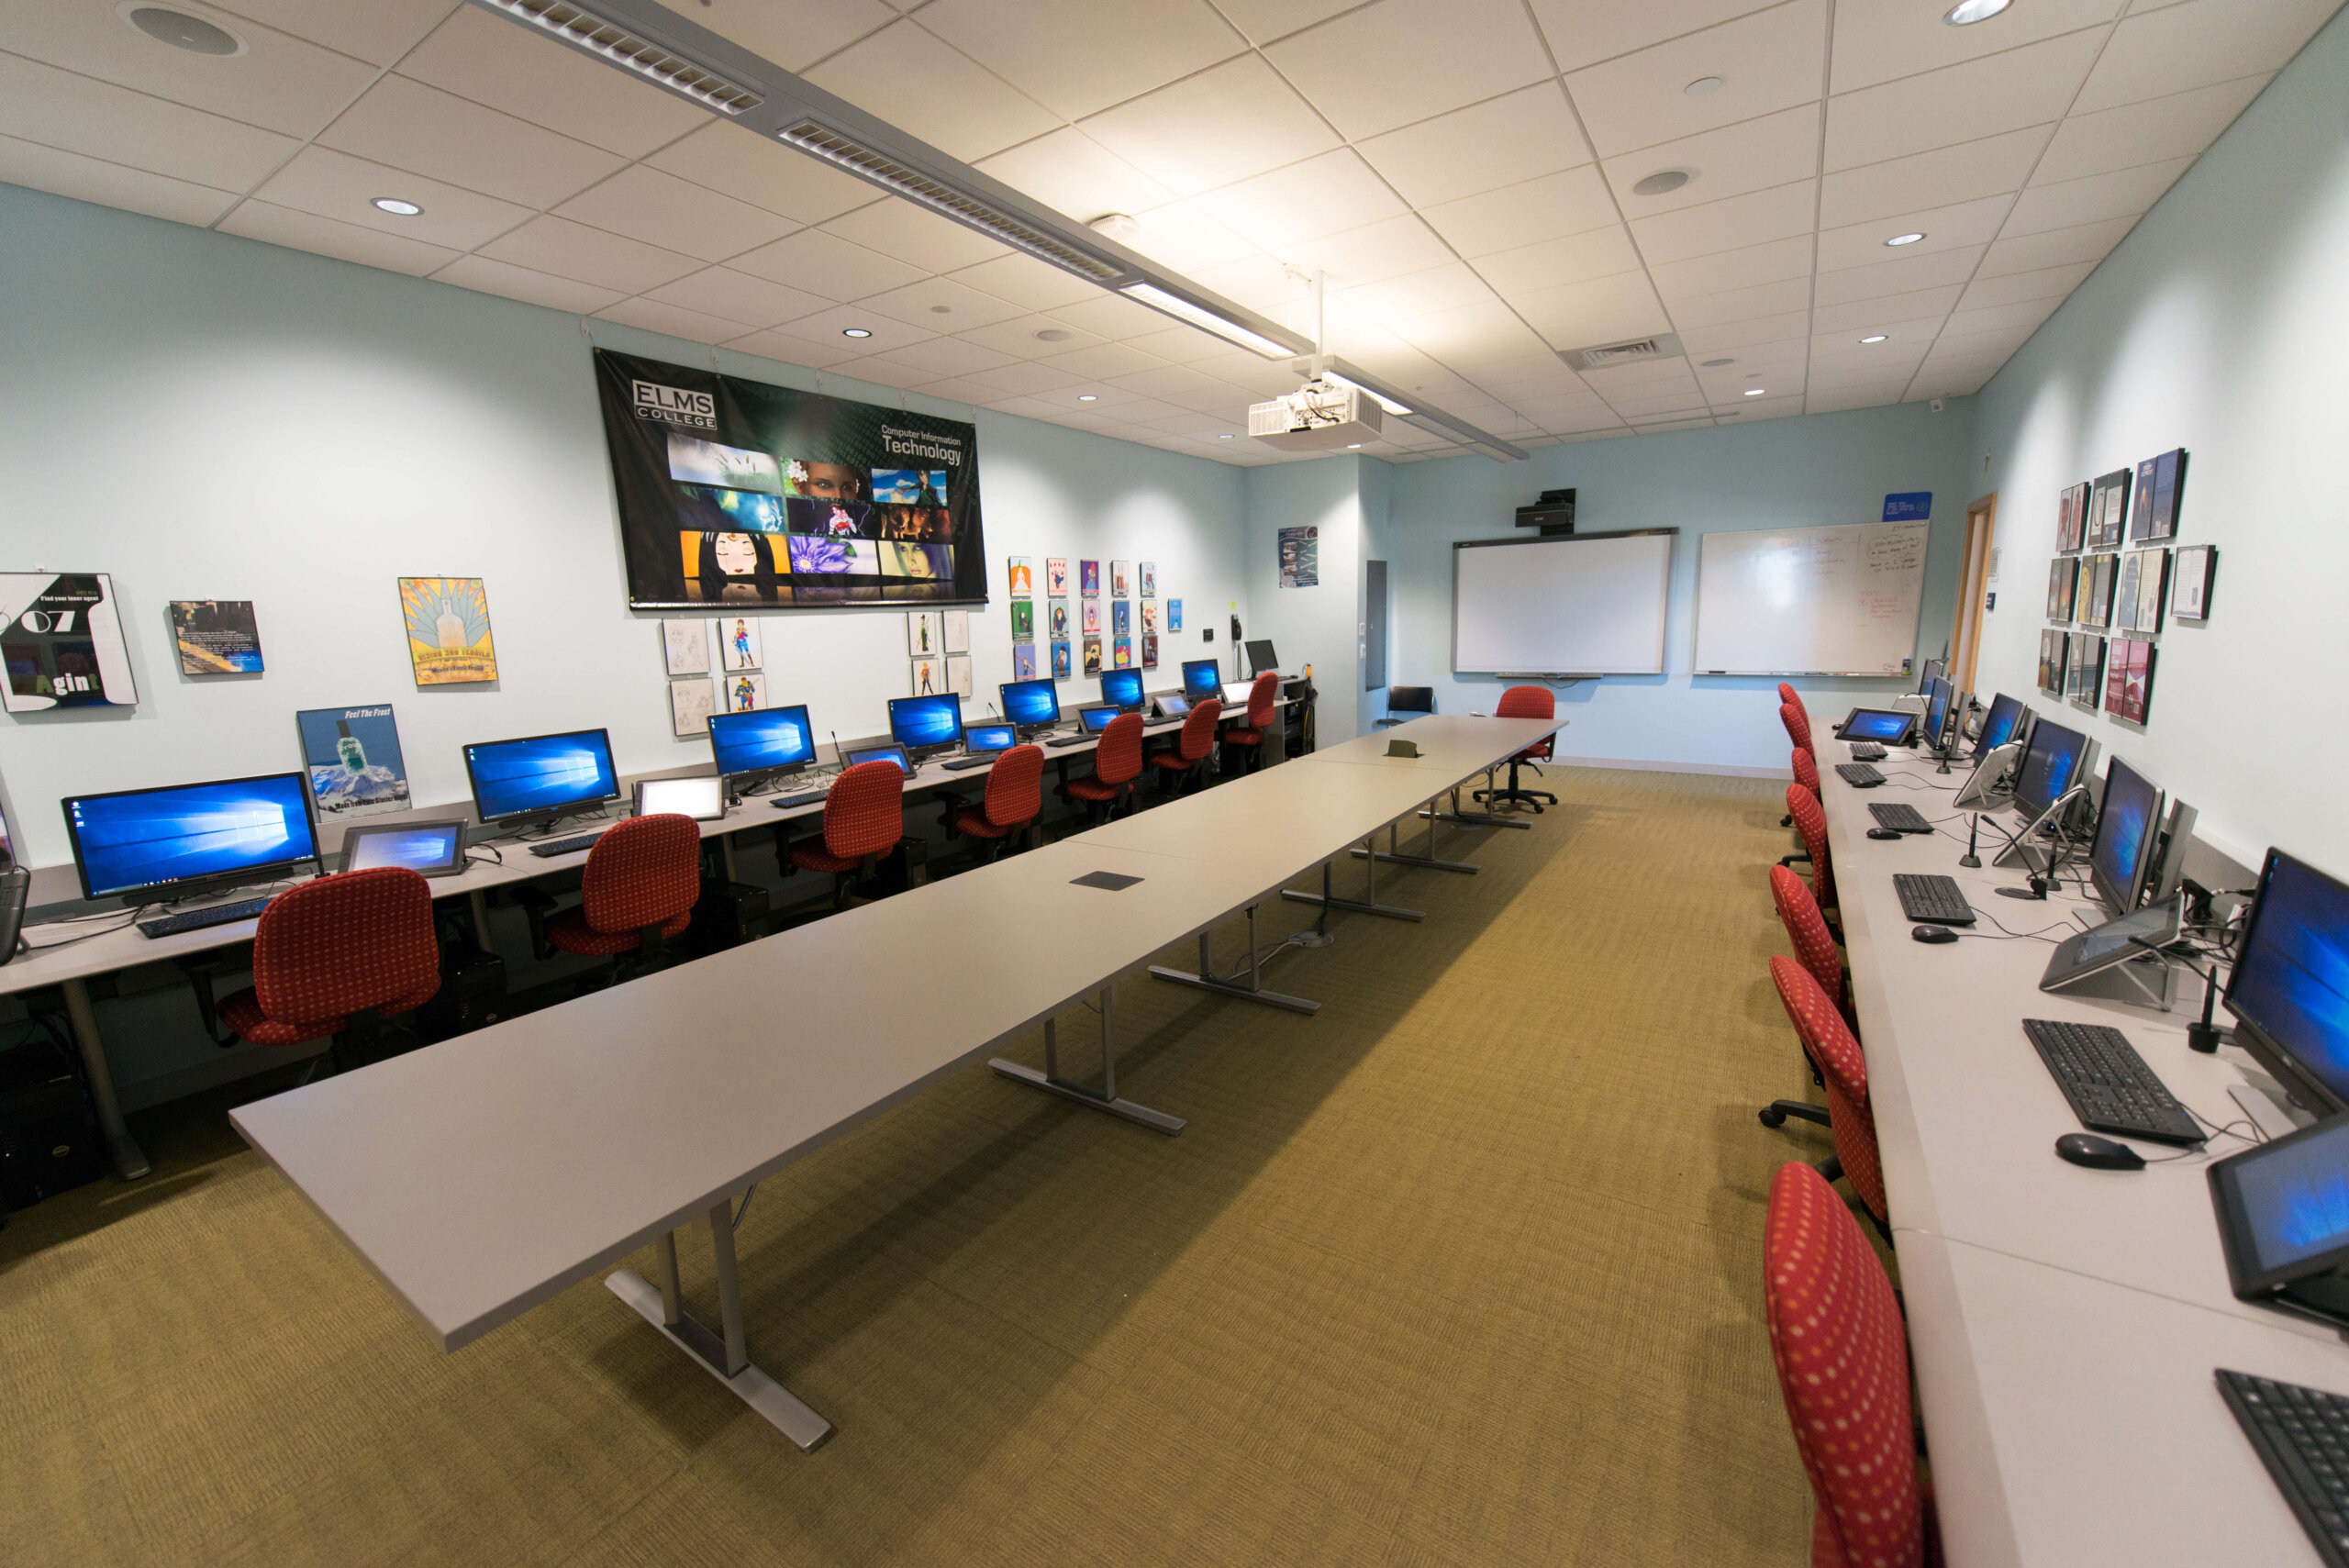 Photo of the Computer Information Technology and Security (CITS) lab in the Lyons Center